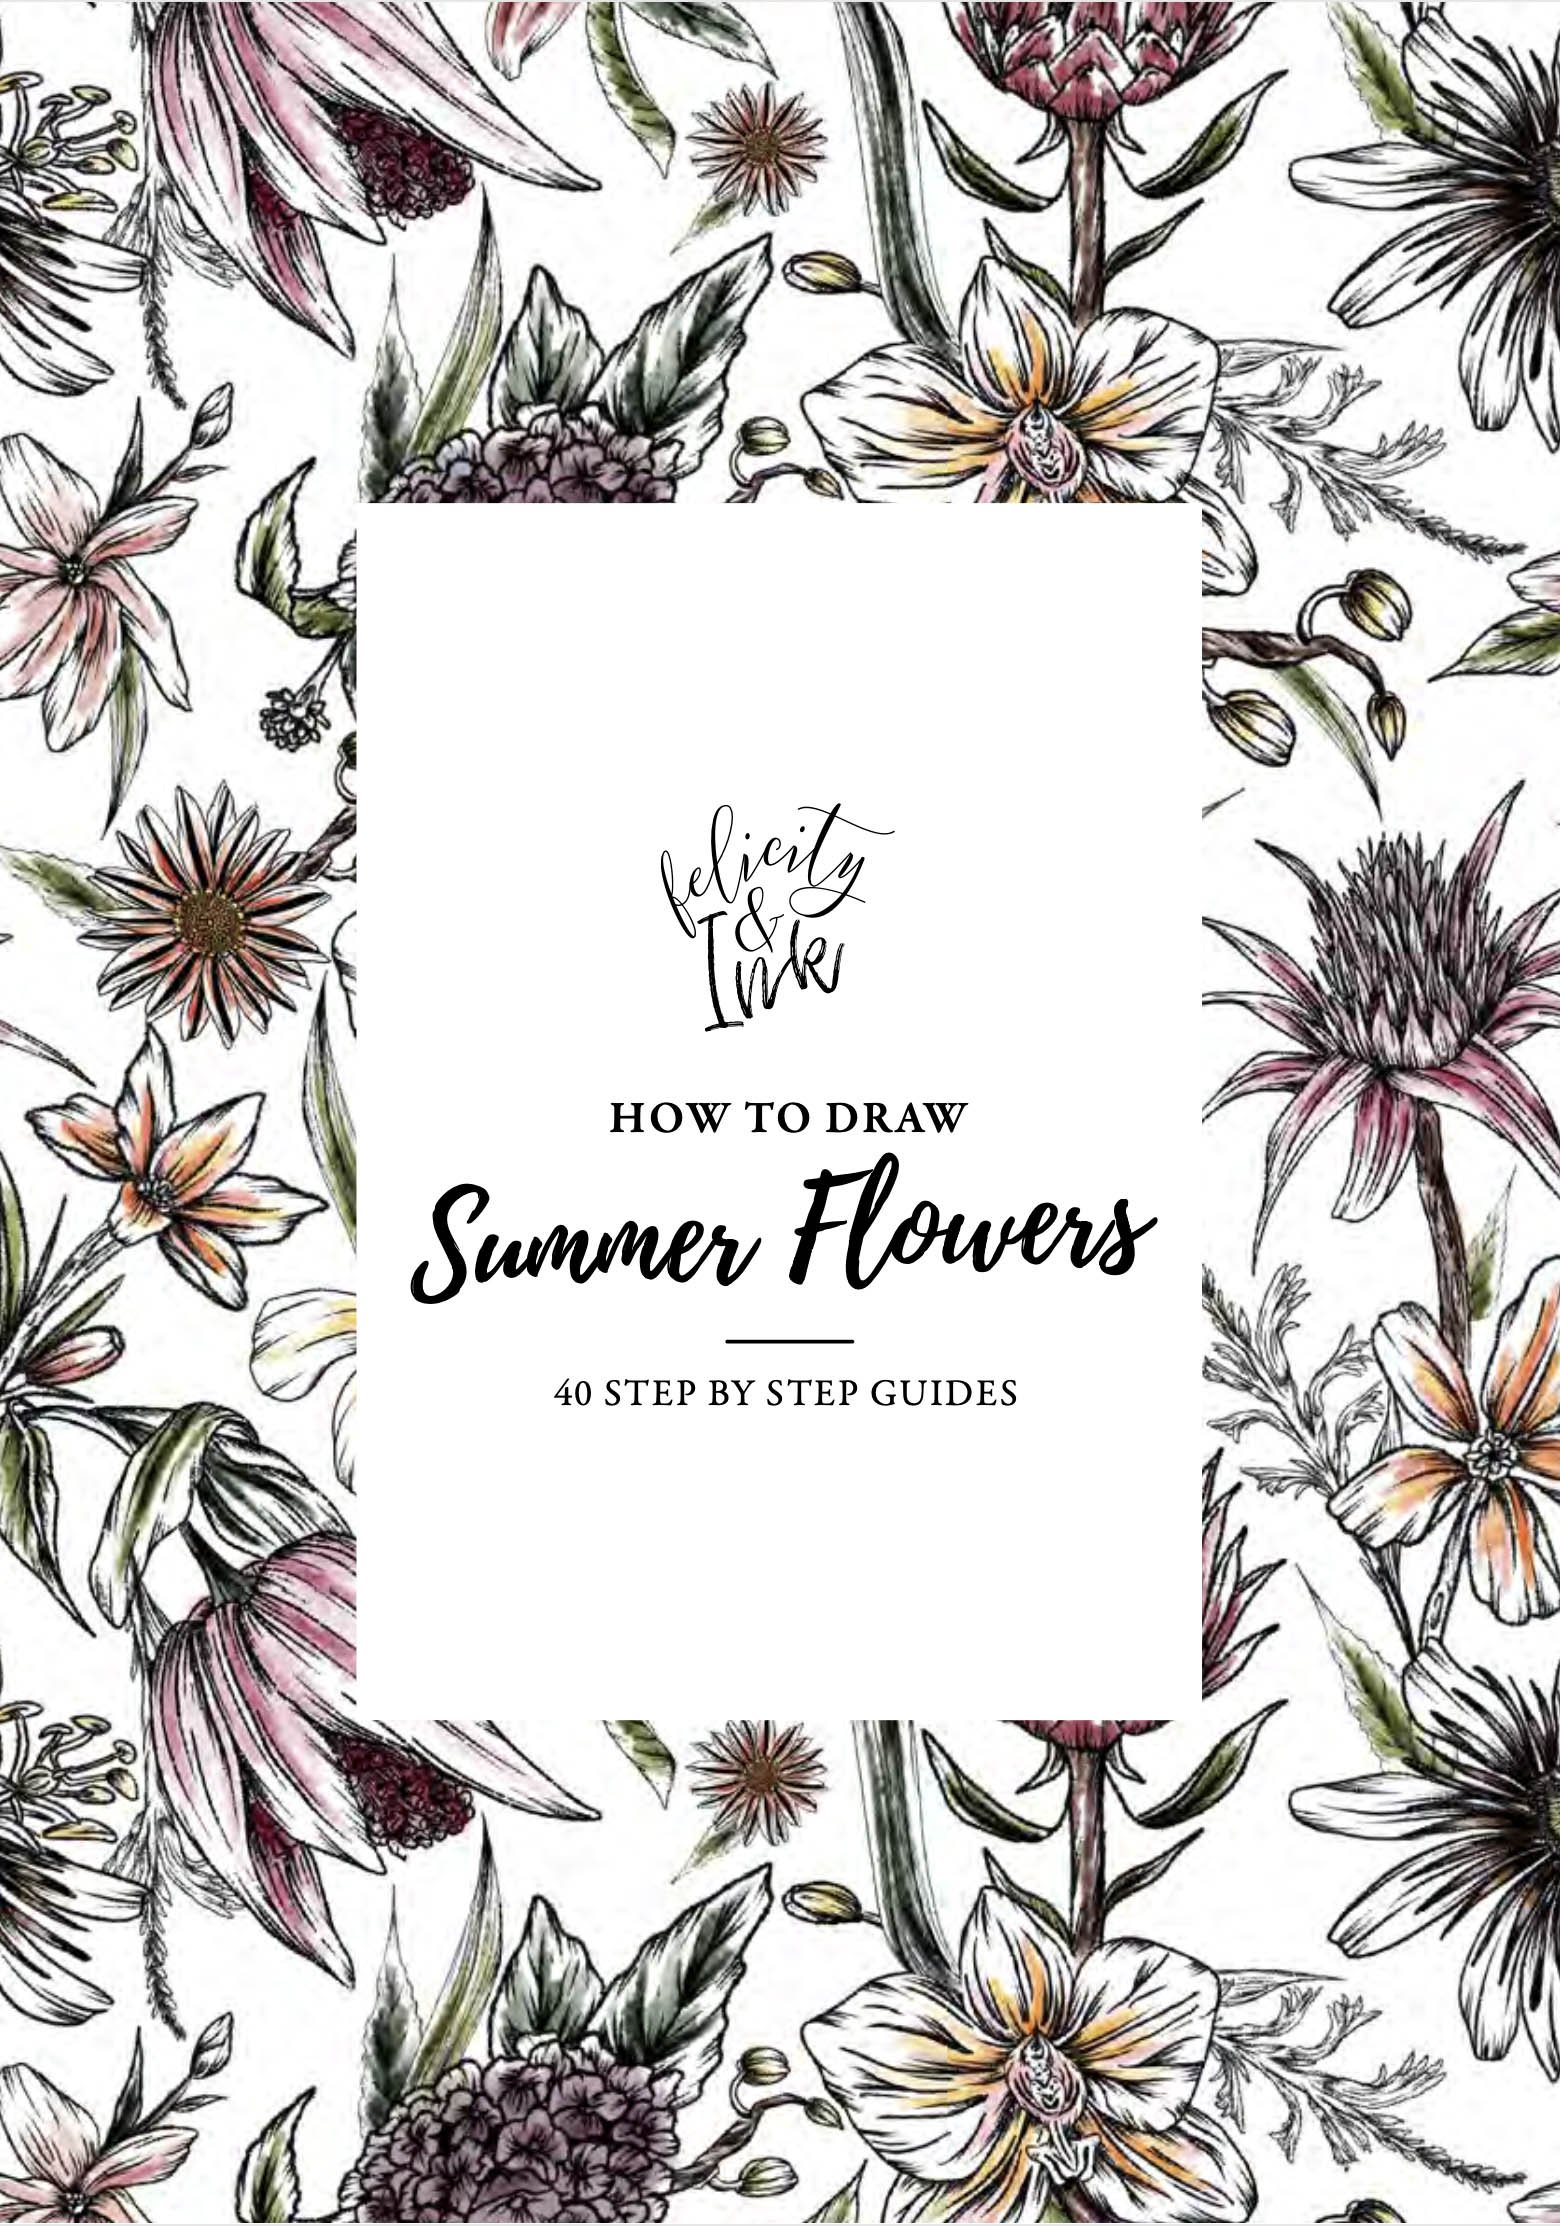 felicity-and-ink-how-to-draw-summer-flowers-step-by-step-ebook-s.jpg